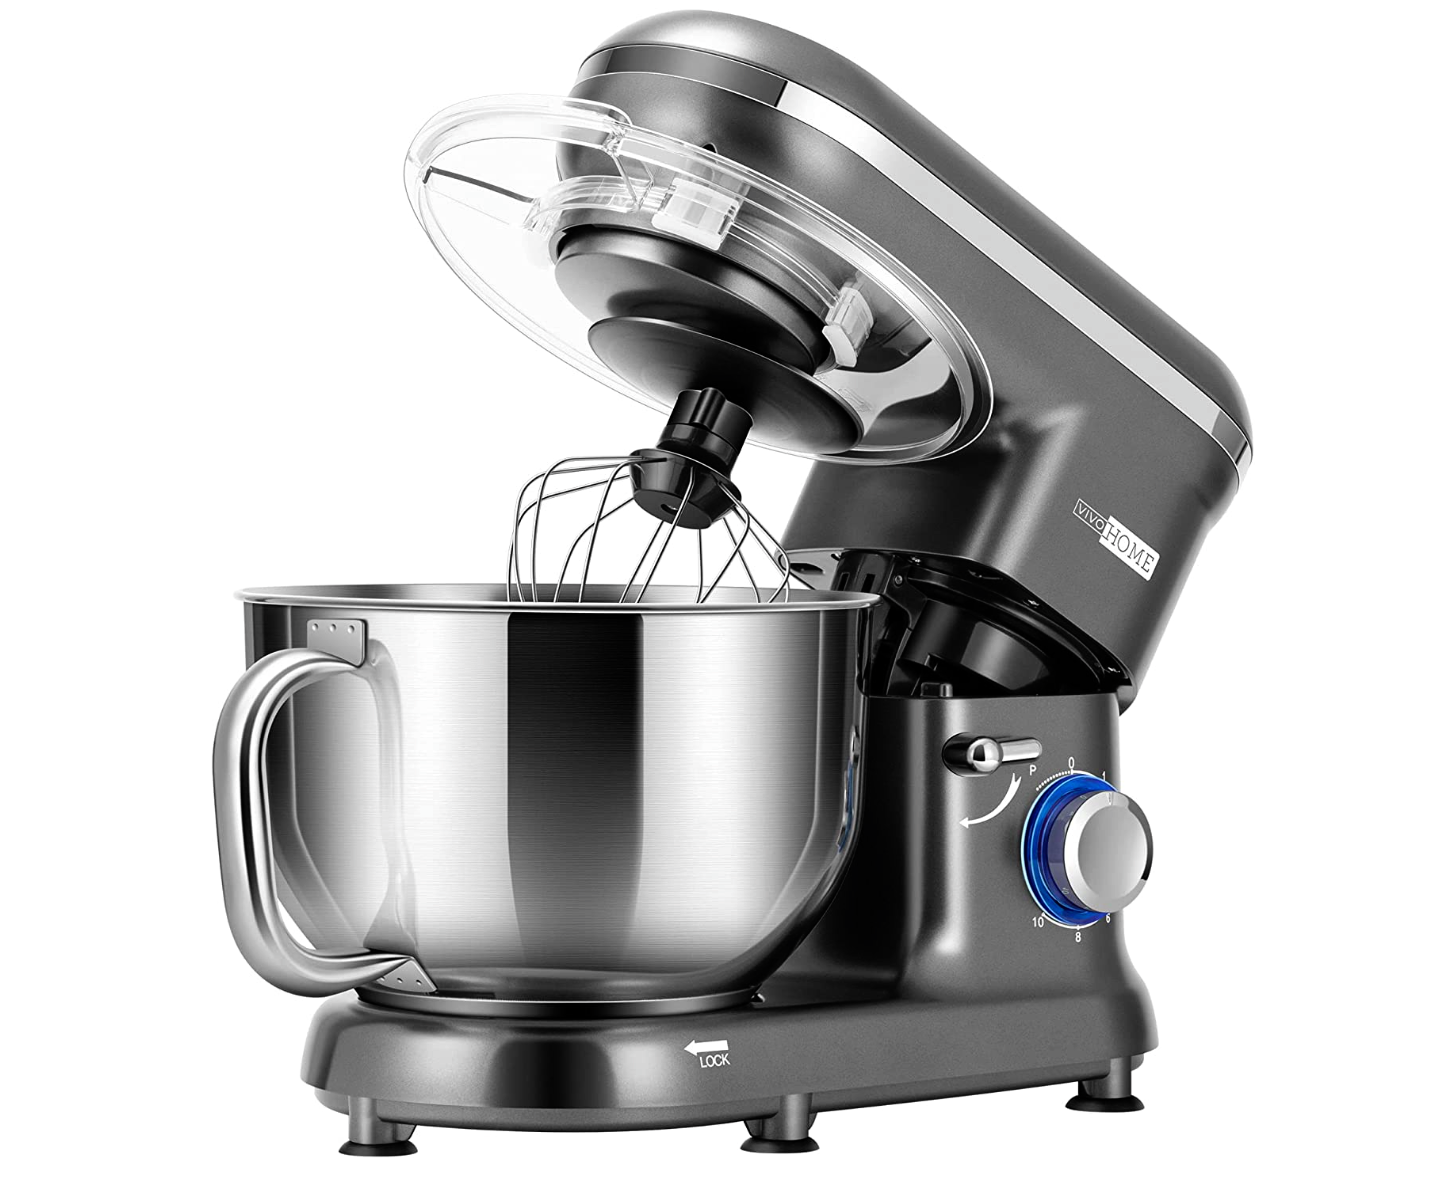 https://www.oldhouseonline.com/oho-html/review/wp-content/uploads/2023/04/VIVOHOME-Stand-Mixer-OHJ.png